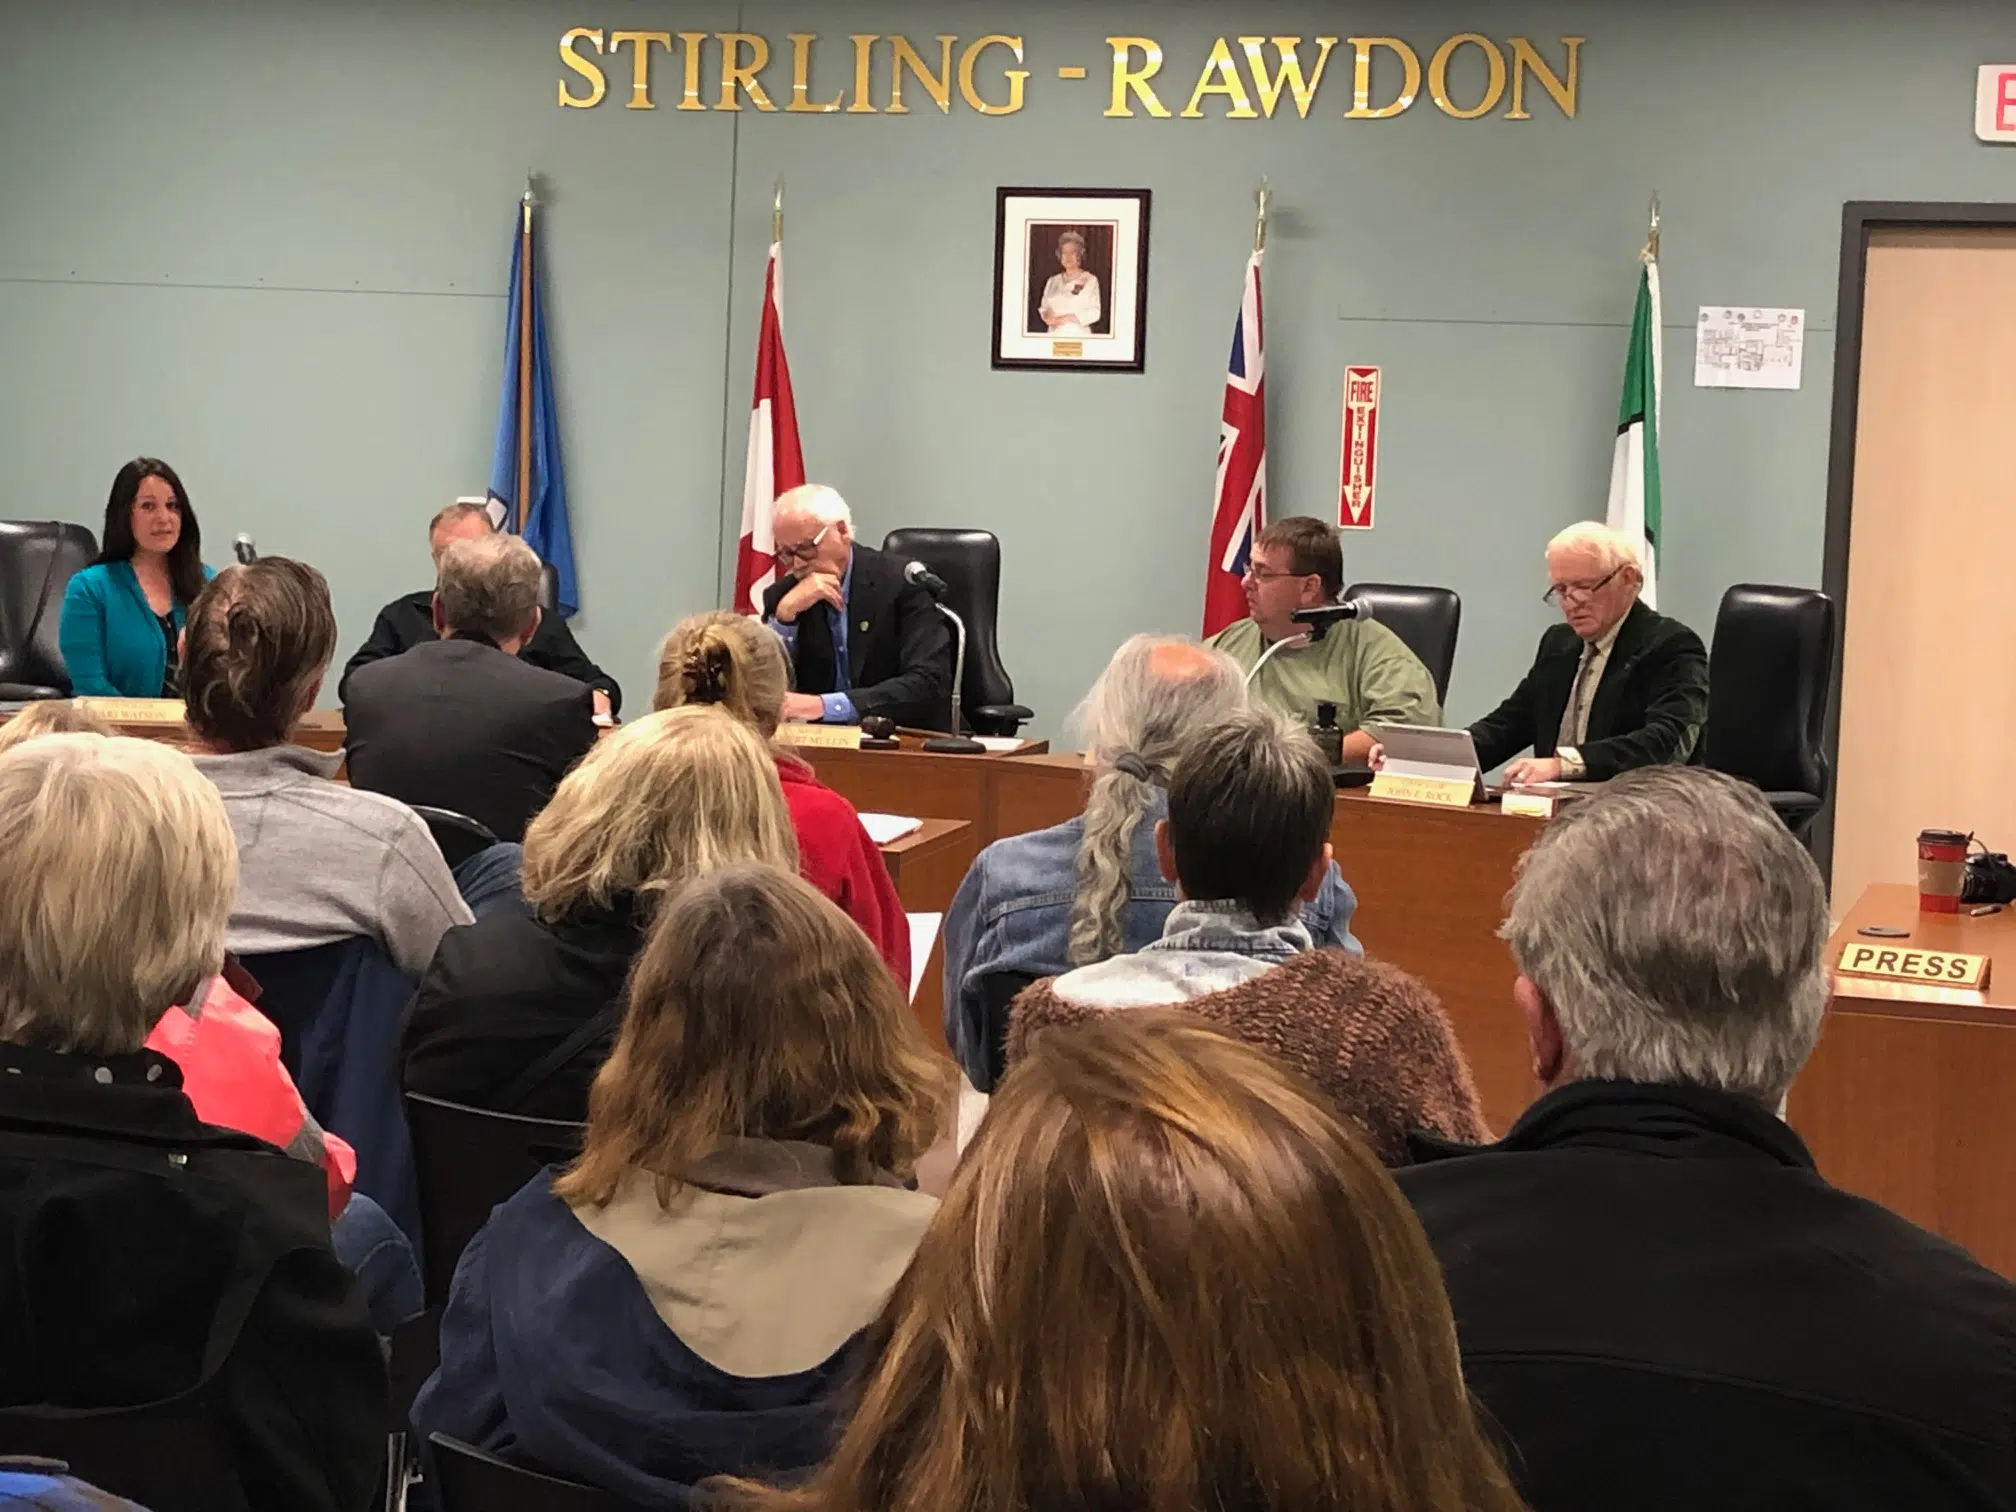 Stirling-Rawdon councillor fighting back